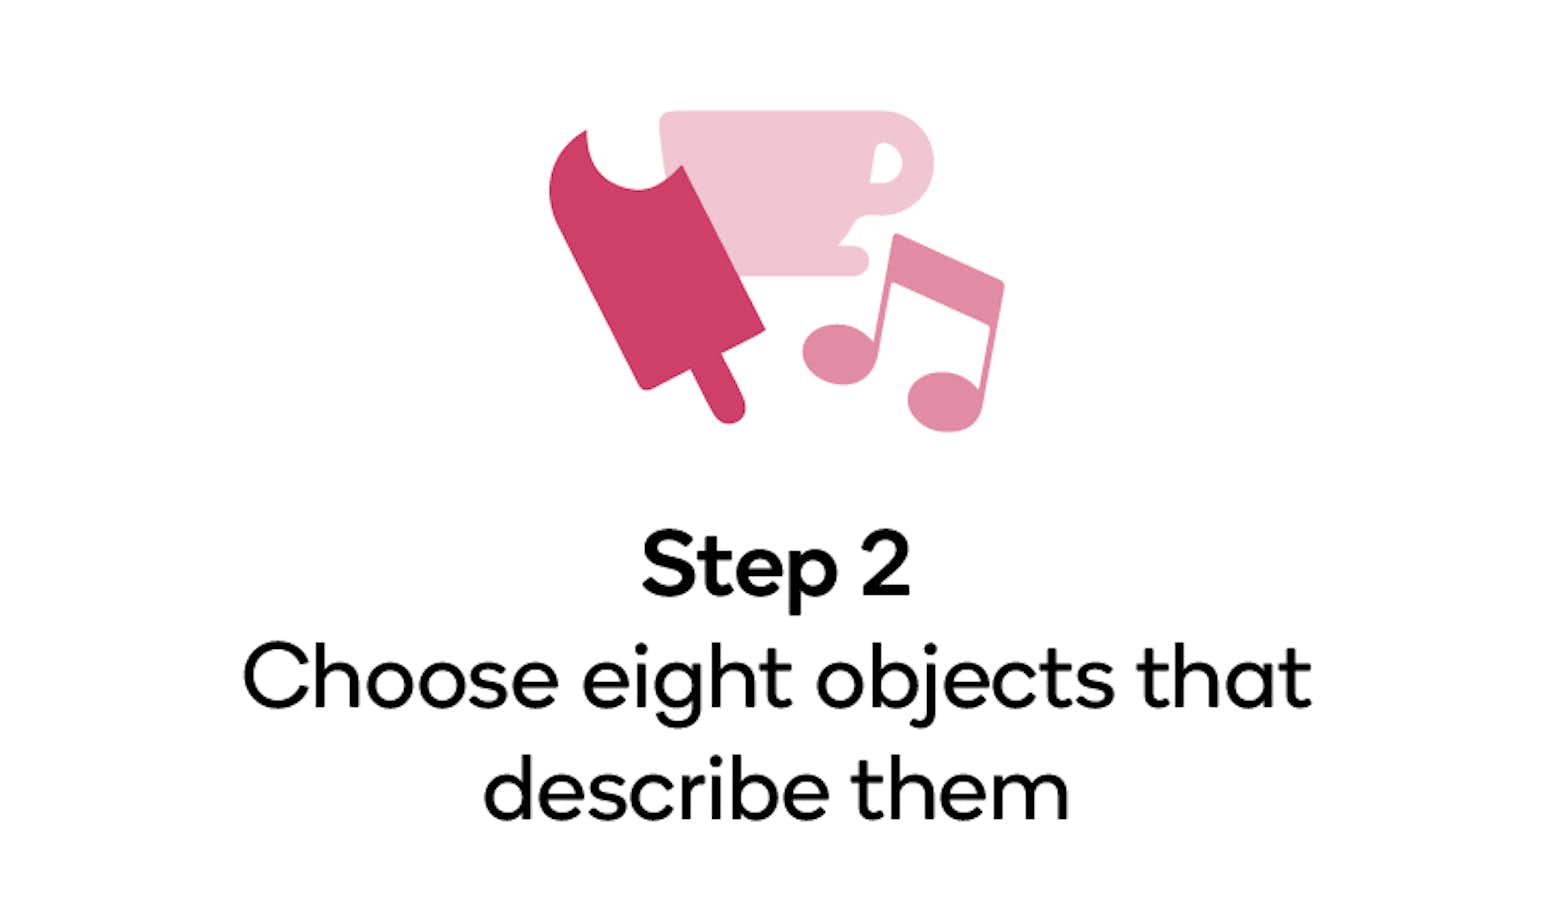 Choose eight objects that describe them